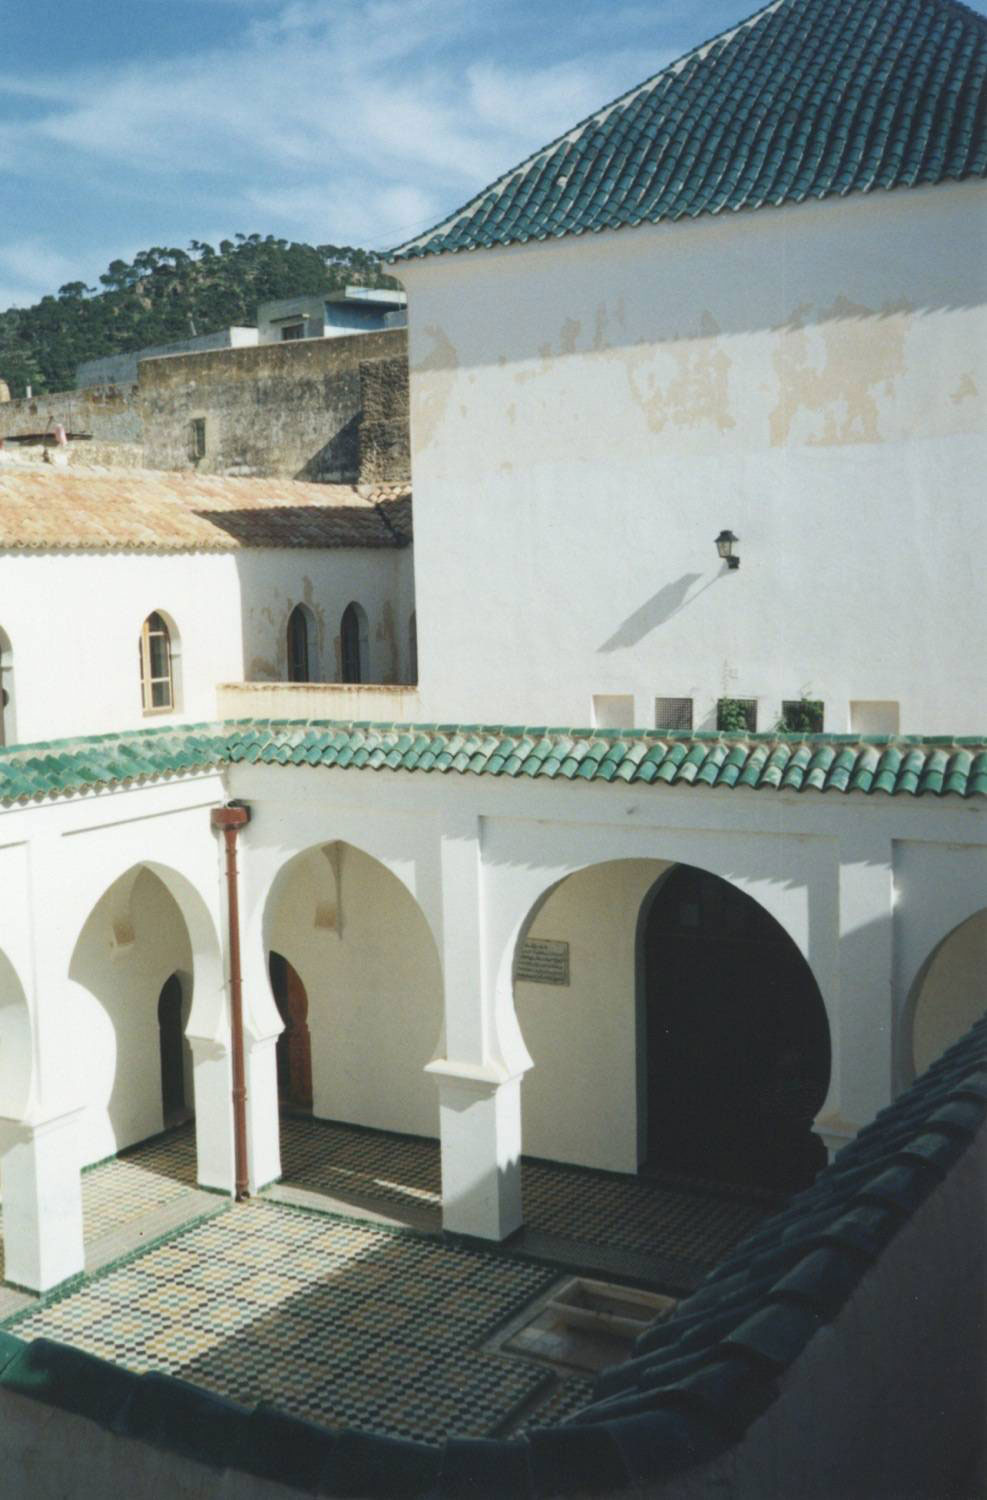 Courtyard of the madrasa viewed from above